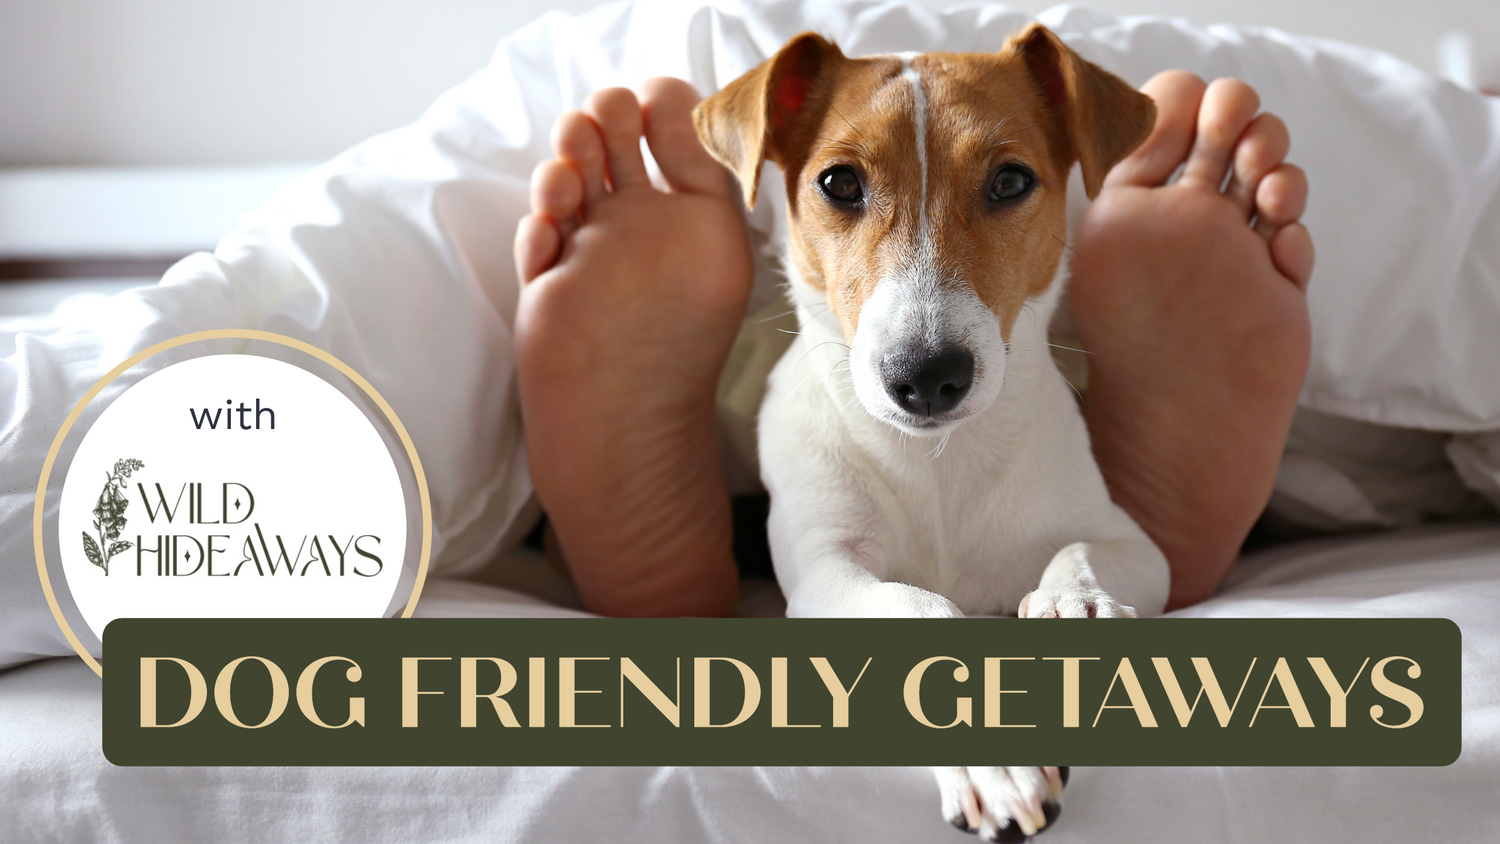 A dog lying in a bed under a blanket between a persons feet and a box with text “Dog Friendly Getaways”